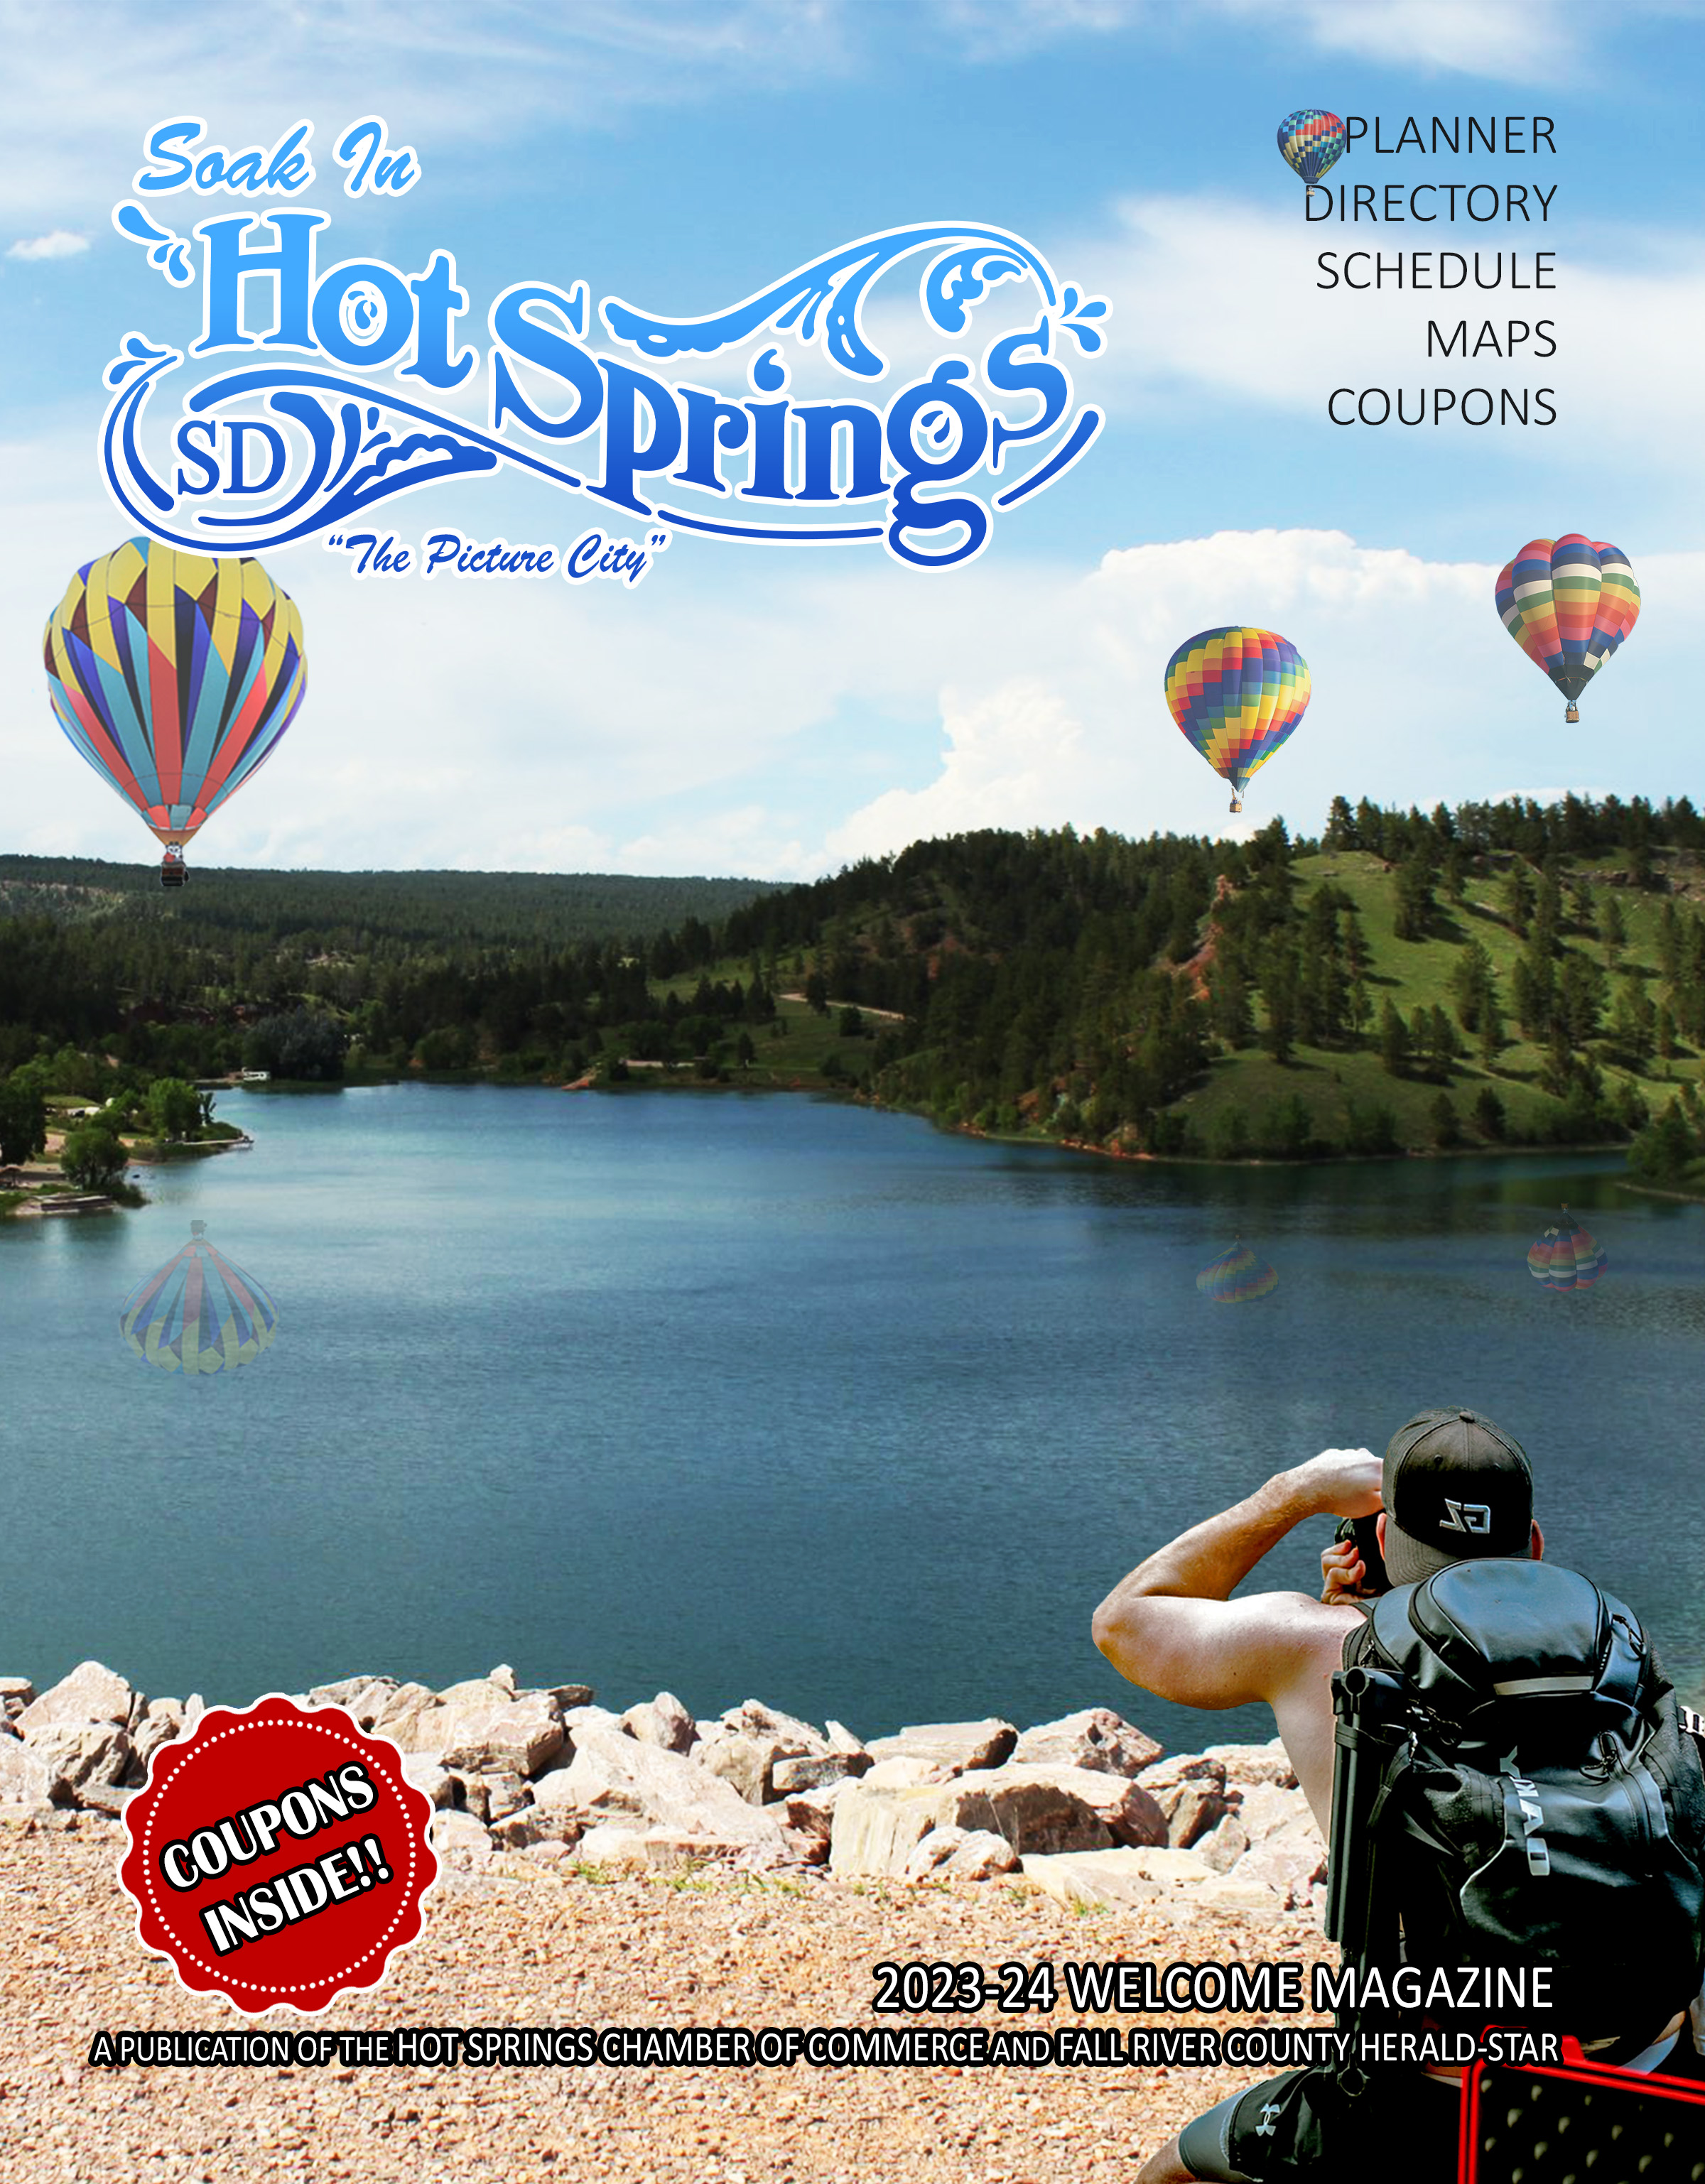 Hot Springs Welcome Magazine Cover